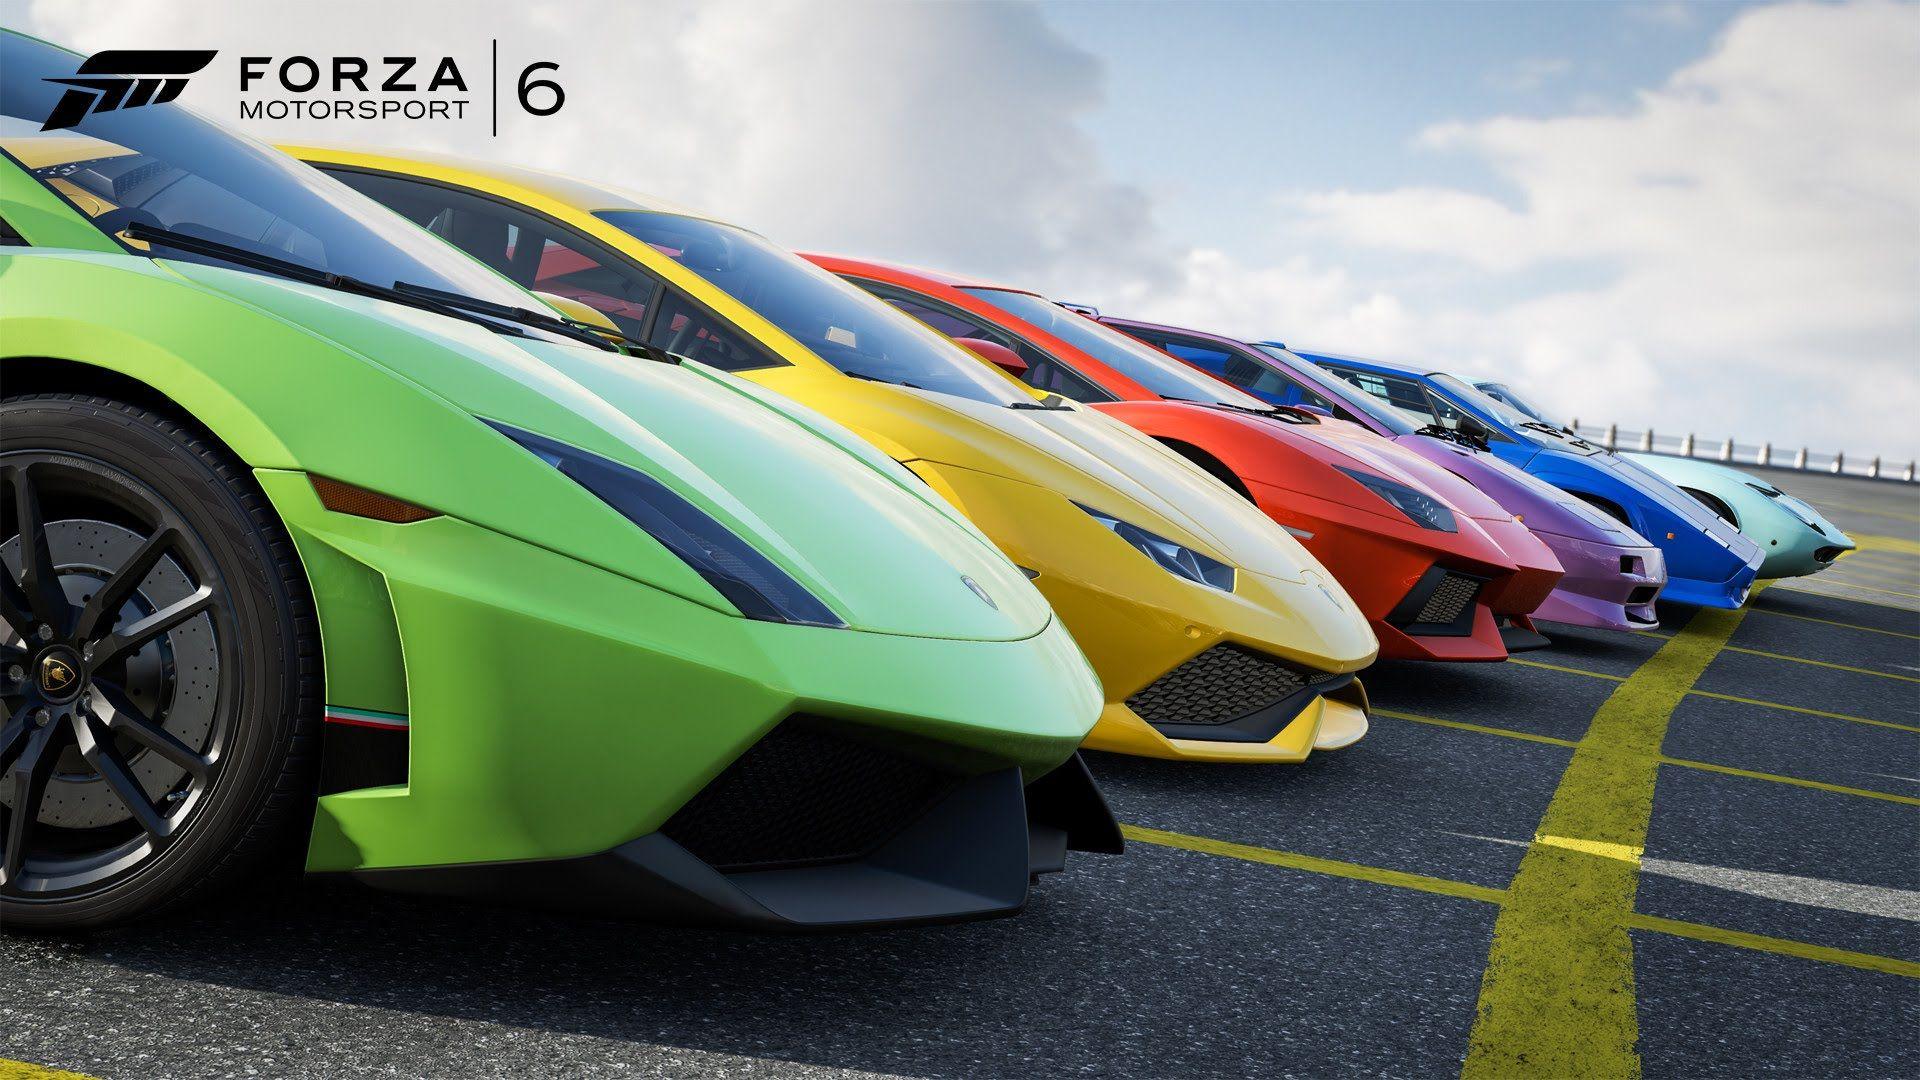 Forza Motorsport 6: Apex HD Wallpaper and Background Image